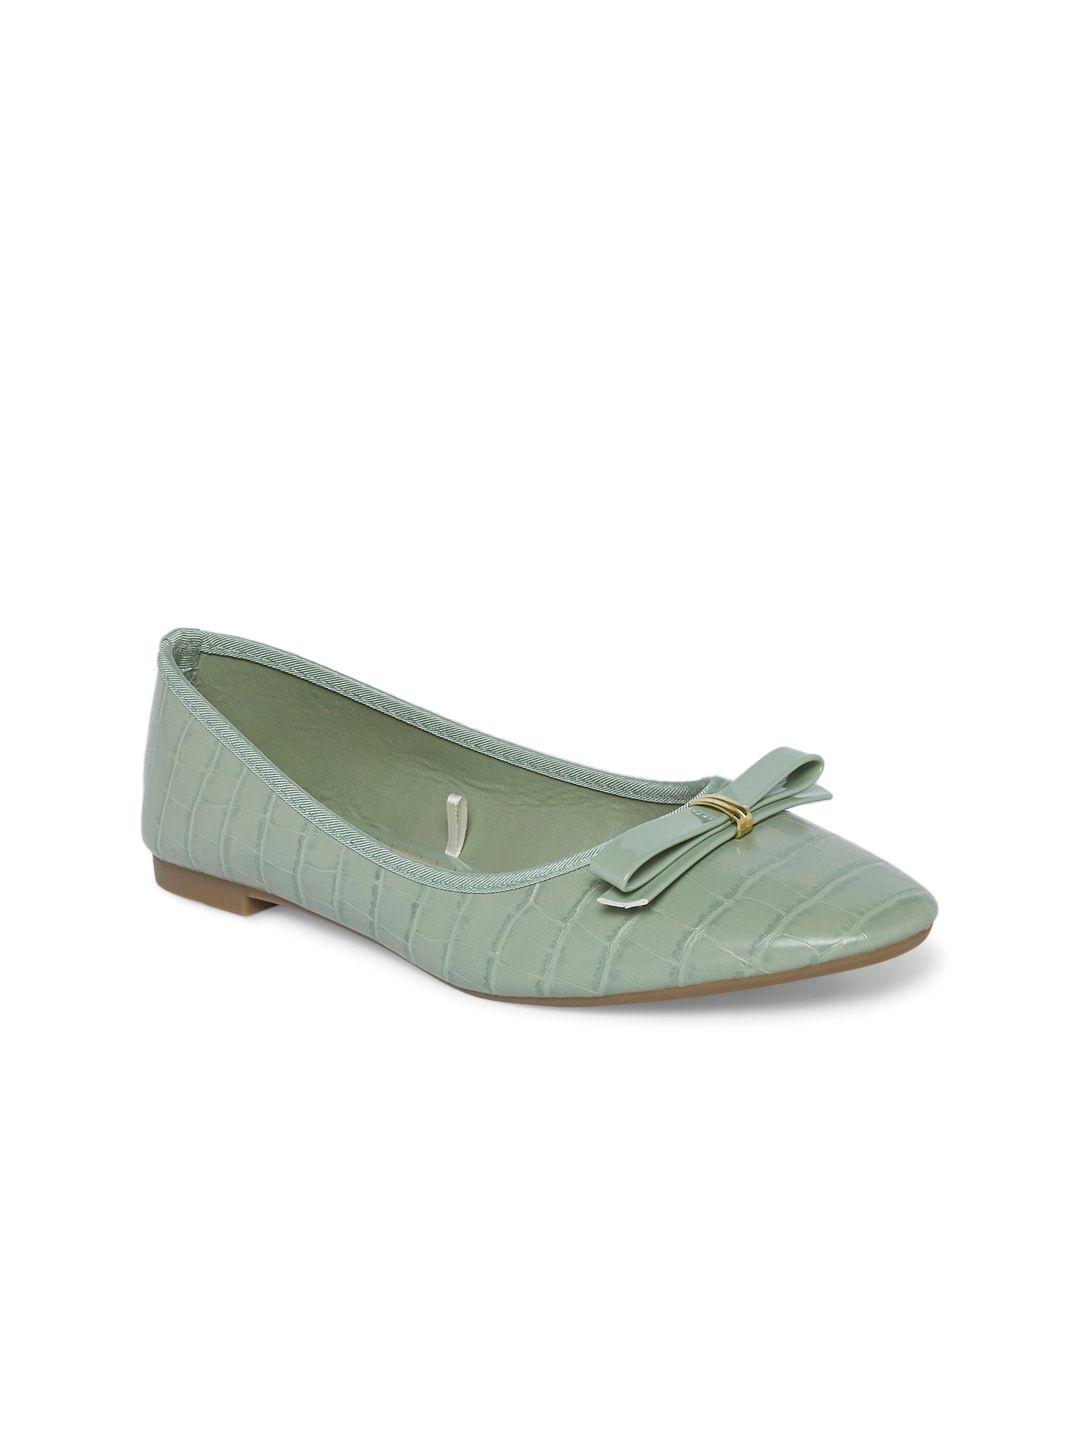 forever-glam-by-pantaloons-women-green-ballerinas-with-bows-flats